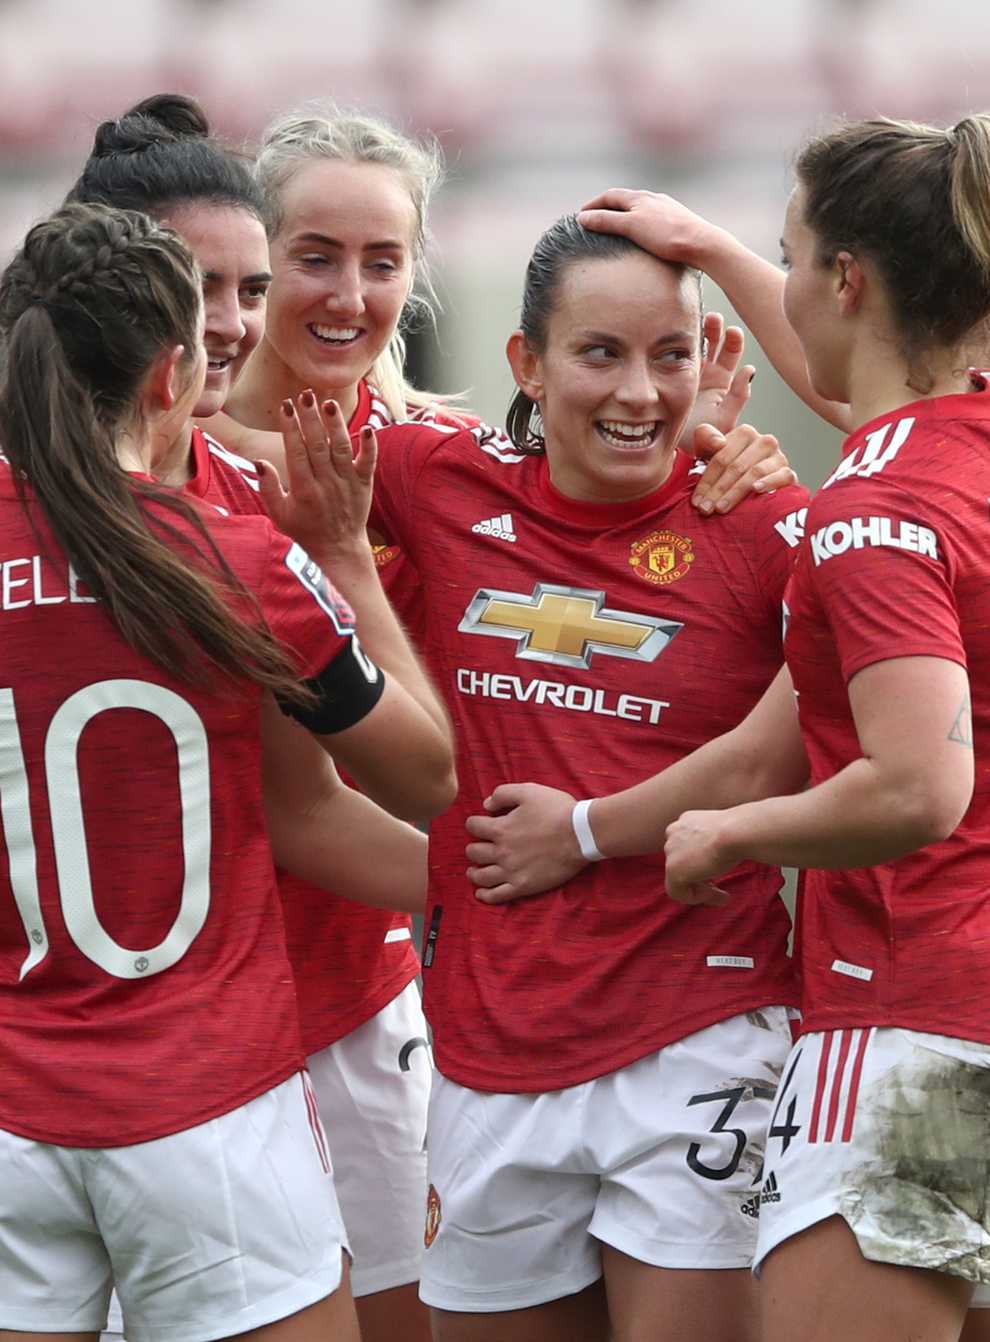 Manchester United Women are heading to Old Trafford for the first time